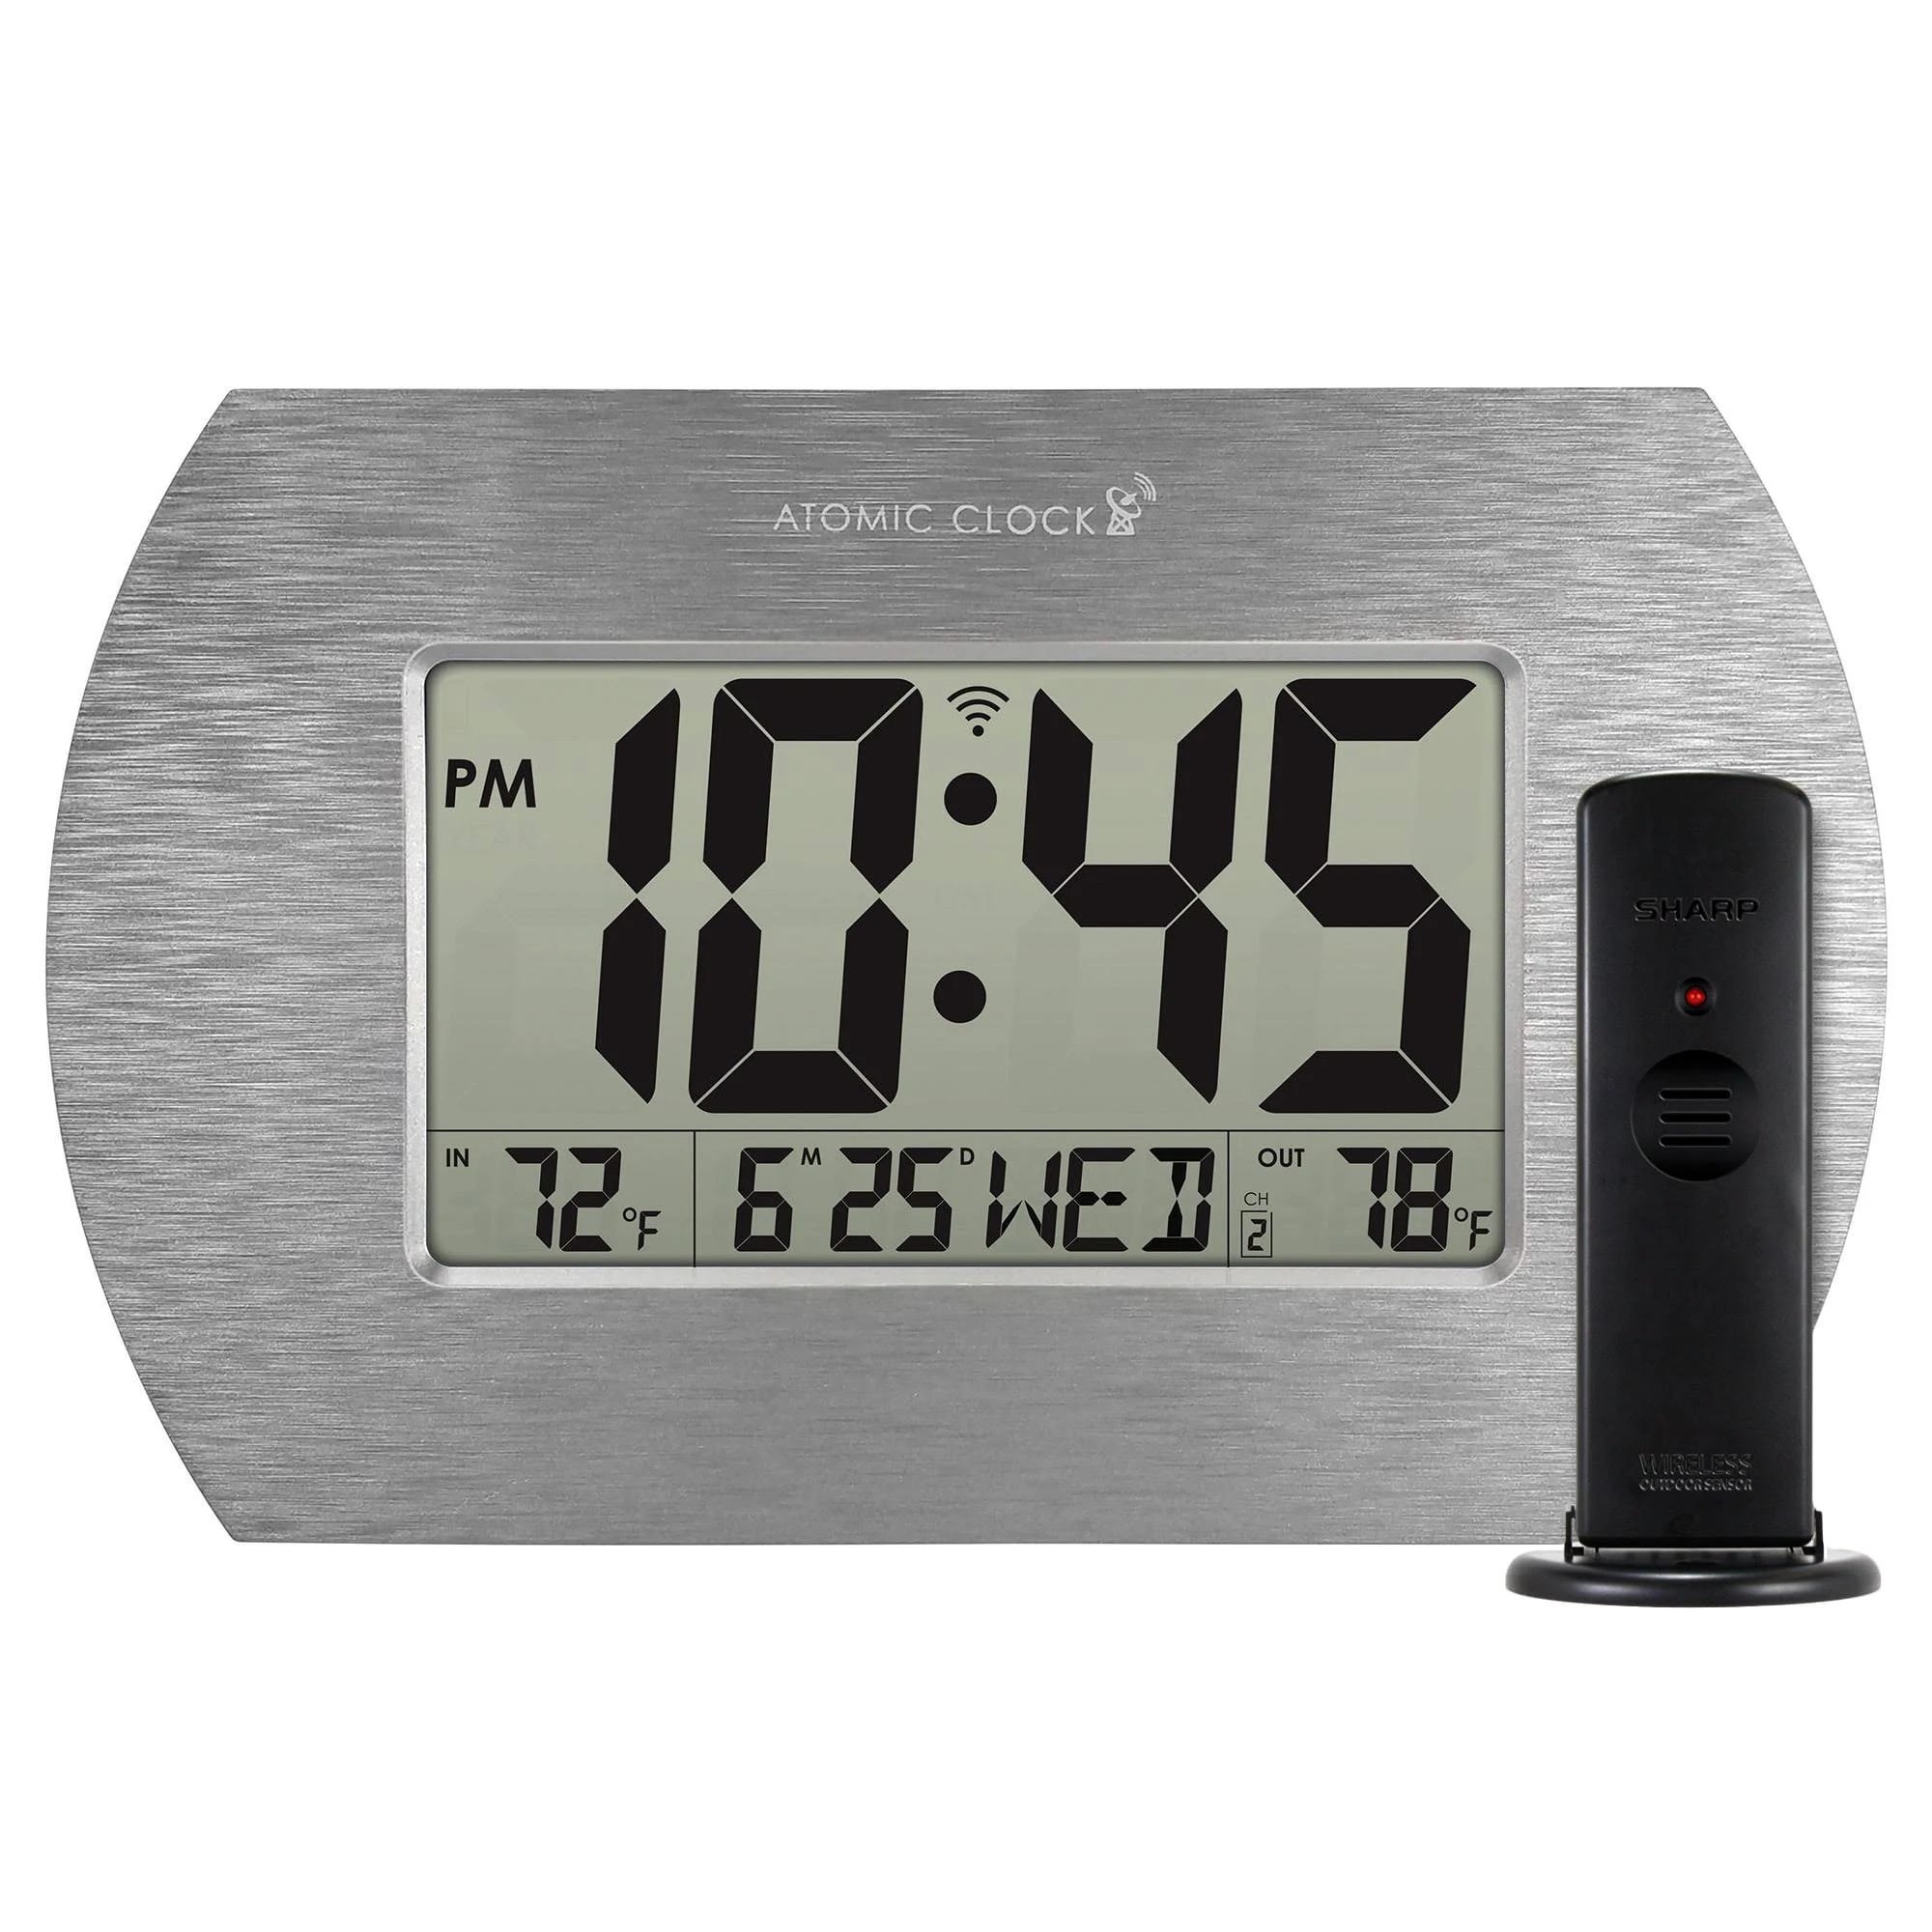 High-Precision Atomic Digital Alarm Clock with Stainless Steel Finish | Image